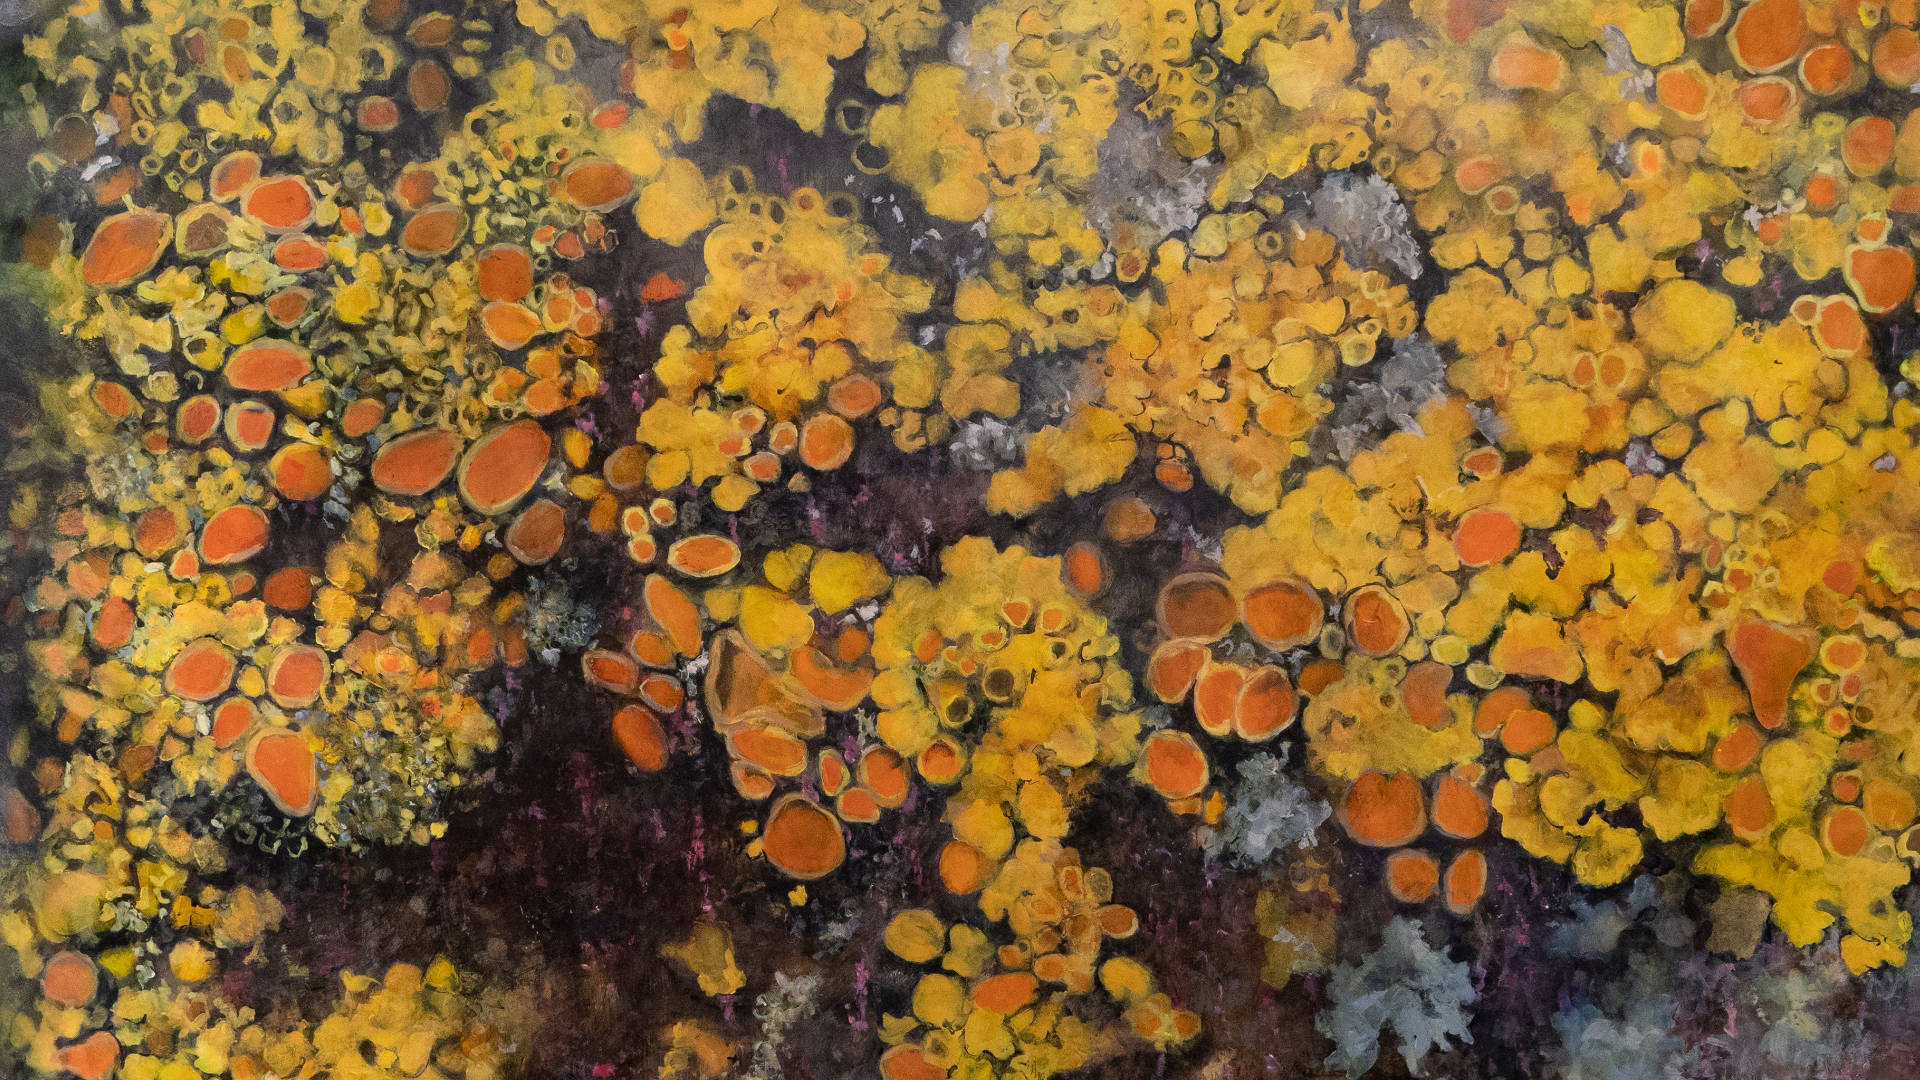 Painting titled 'Lichen, Mulberry Way, 2' by Helen Thomas. Painted in acrylic paint on paper. Size 1m x 1.5m